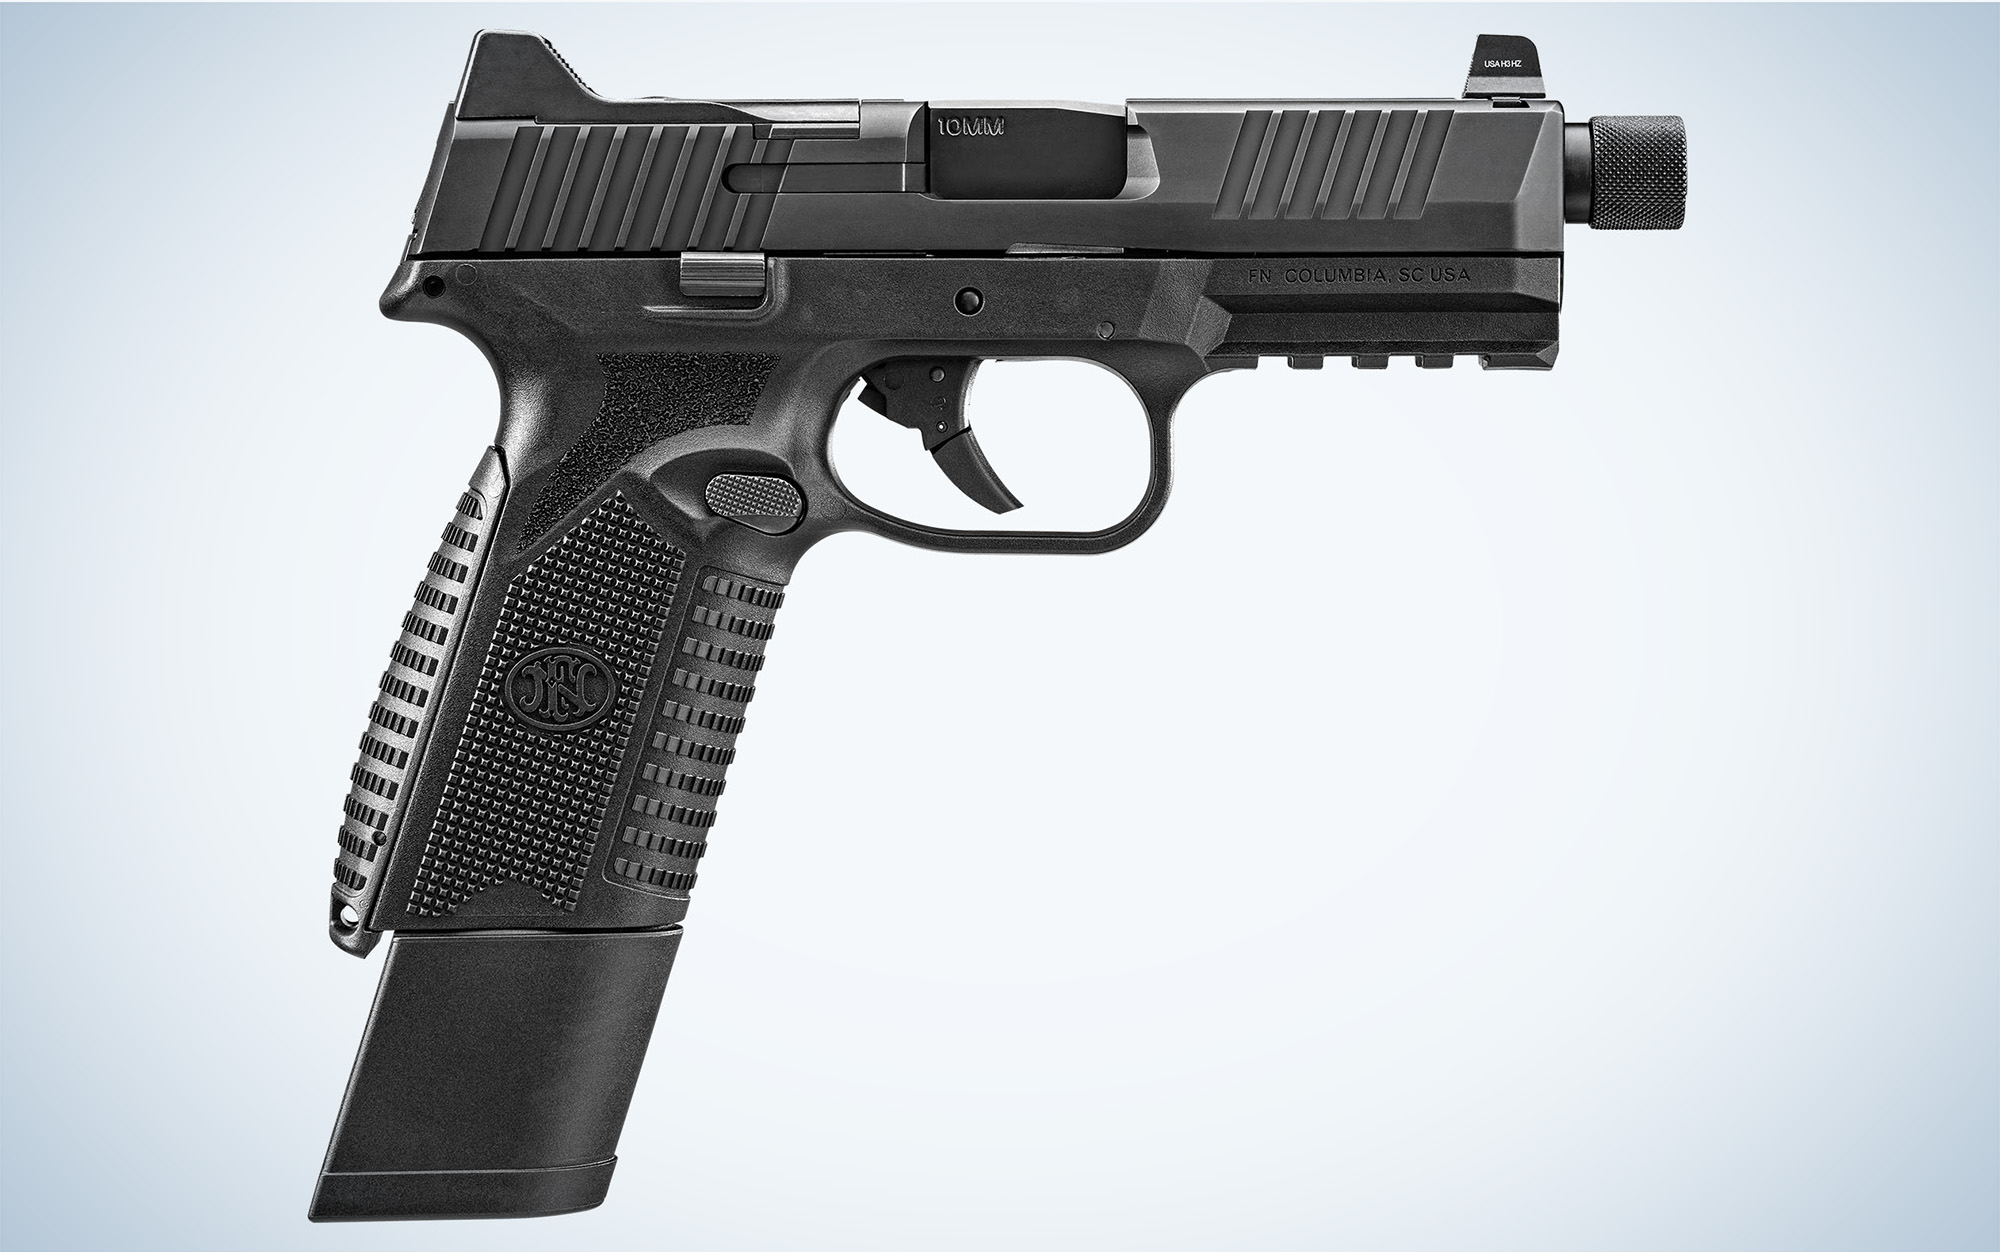 The FN Tactical 510 is one of the new handguns from SHOT Show 2023.